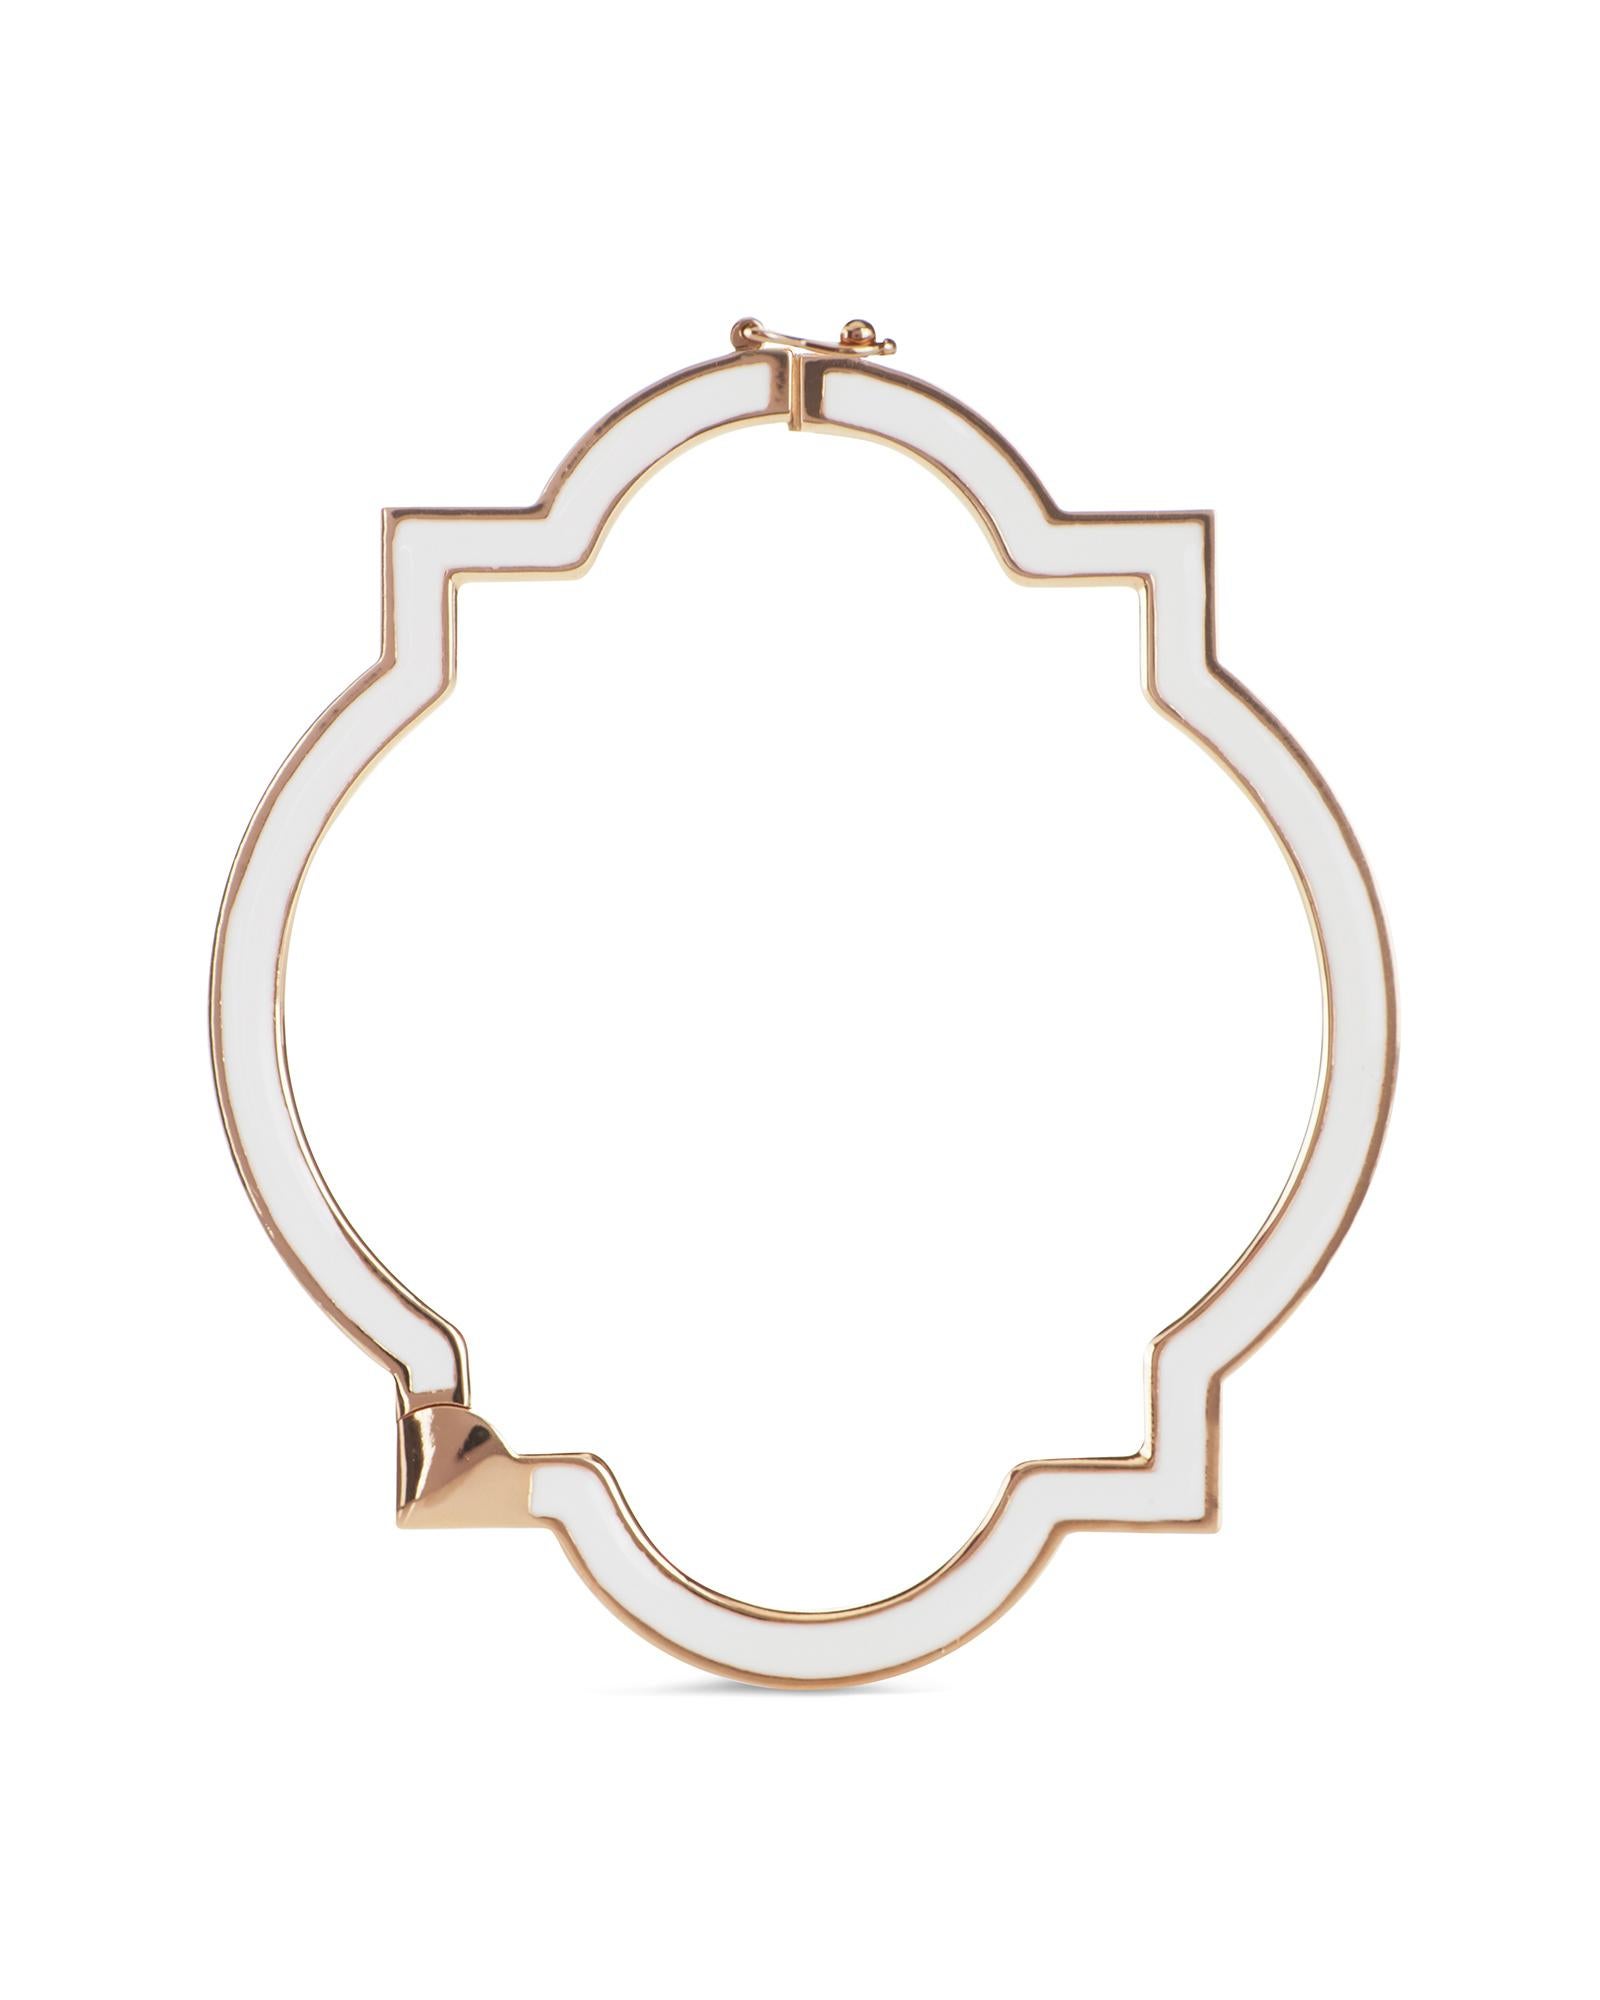 The rigid Anime bracelet, made of rose gold, is characterized by an elegant contemporary style. The unconventional symbol is distinguished by its geometric shape, consisting of black enamel and a row of diamonds cleverly set. The luxurious jewel,